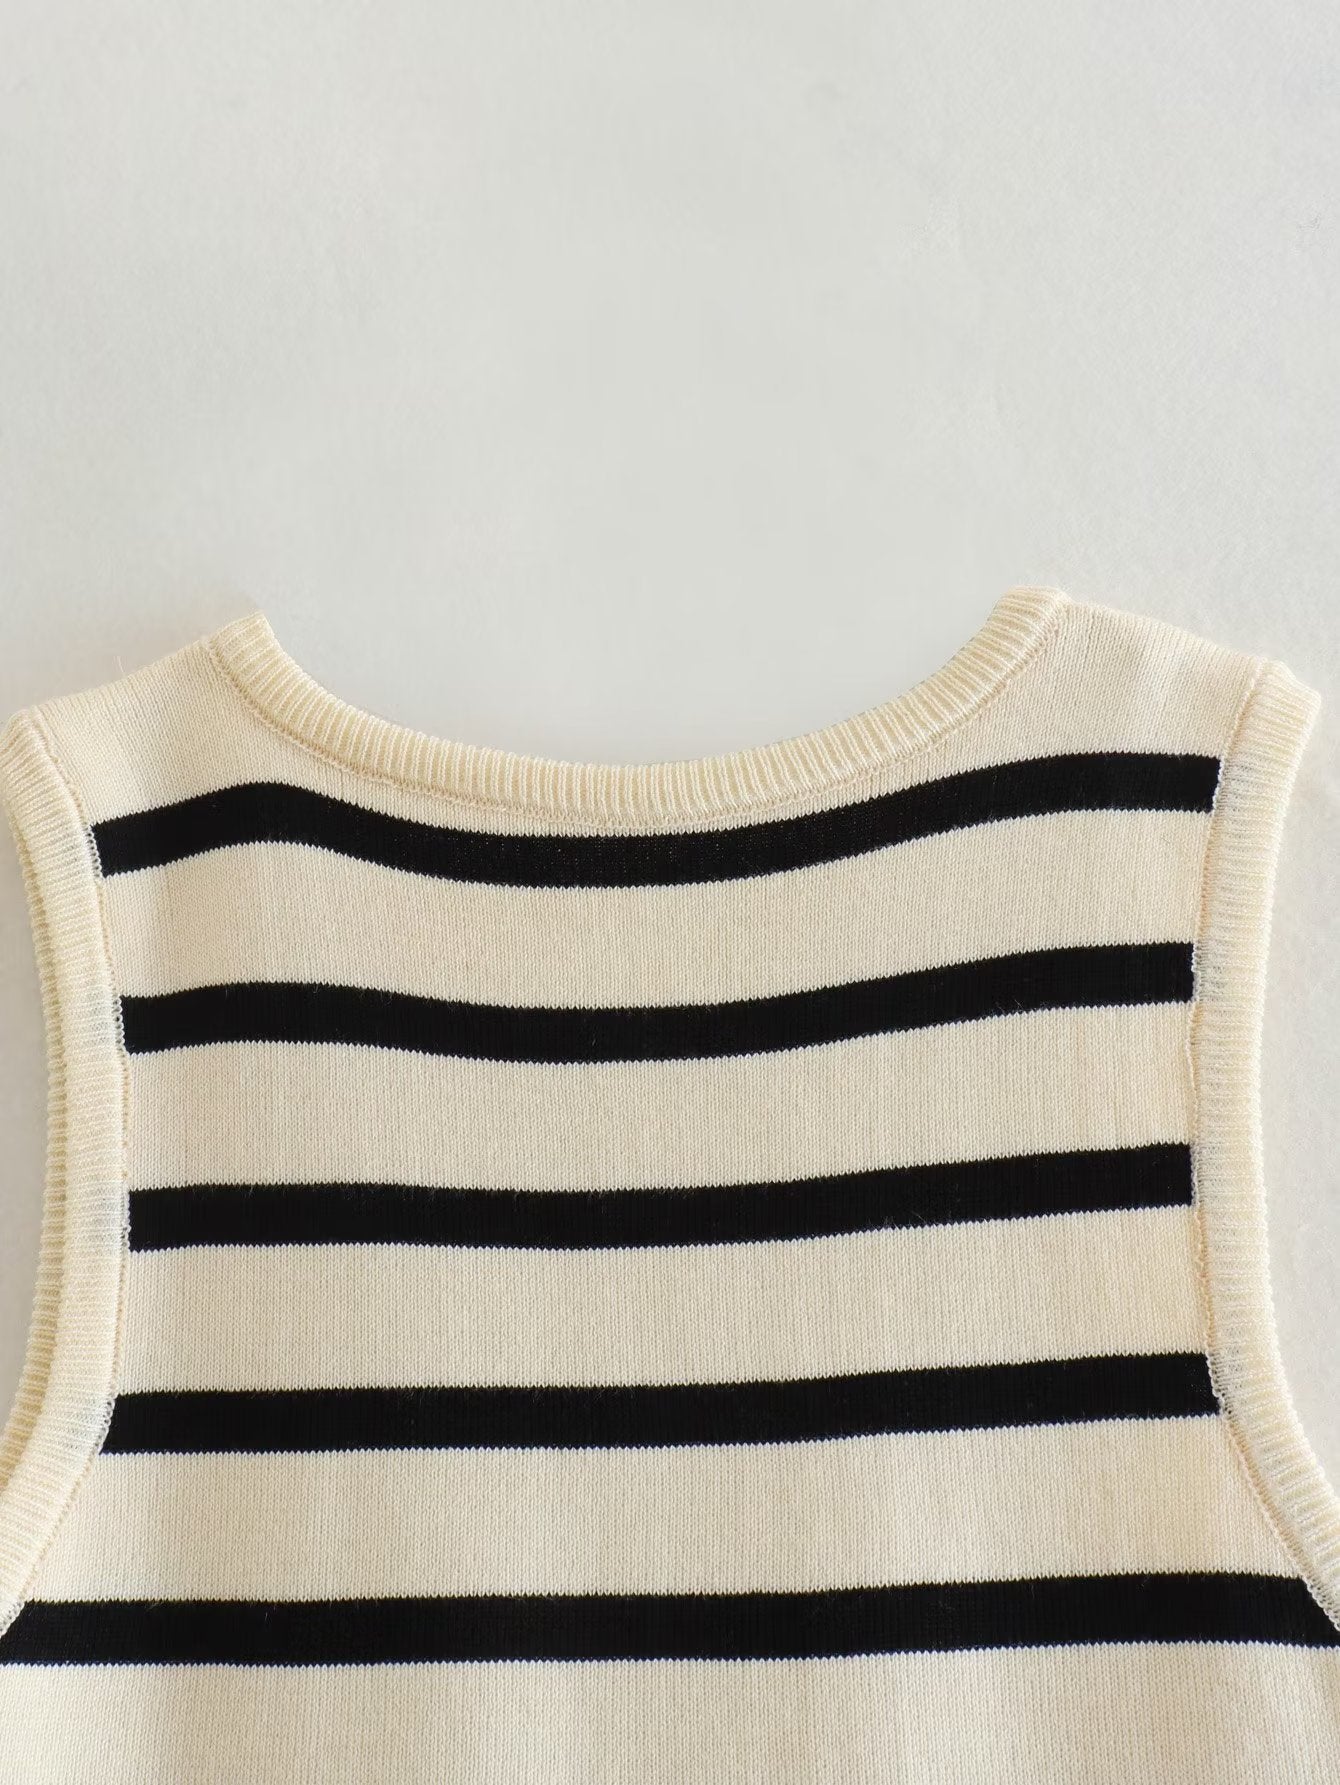 2023 Fashion Trends | Striped Knitted Crop Top